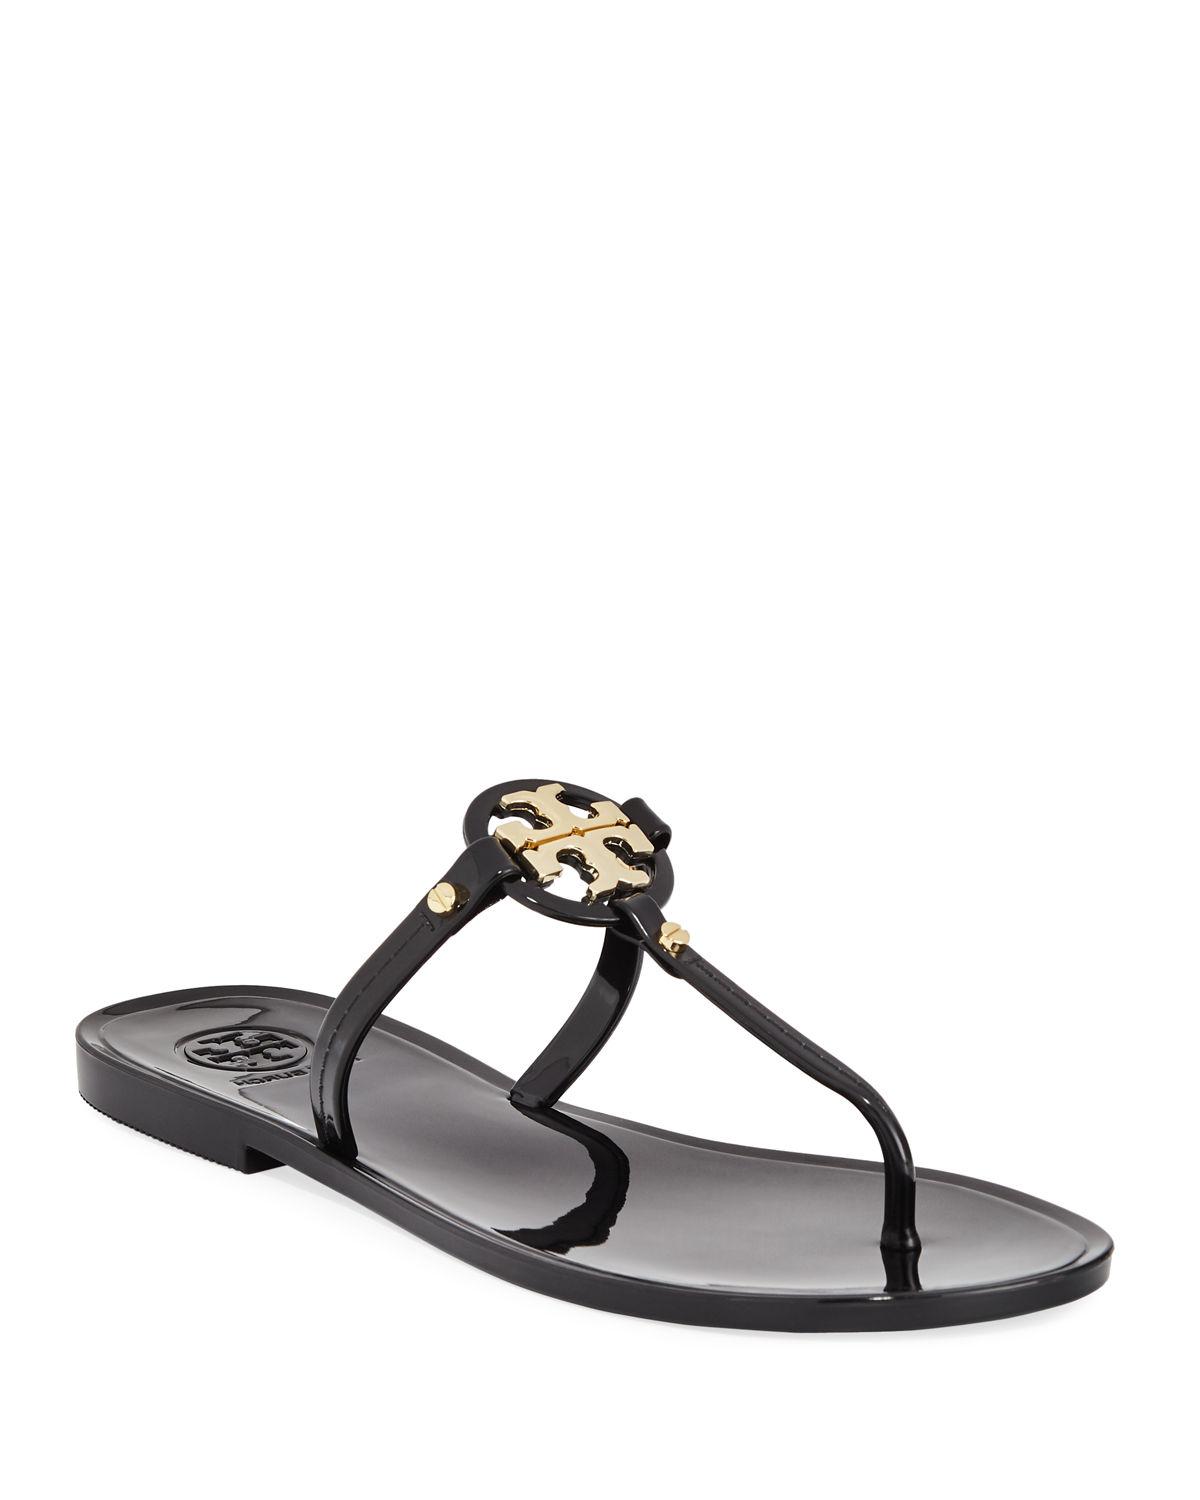 Tory Burch Mini Miller Flat Jelly Thong Sandals in Black - Save 8% - Lyst